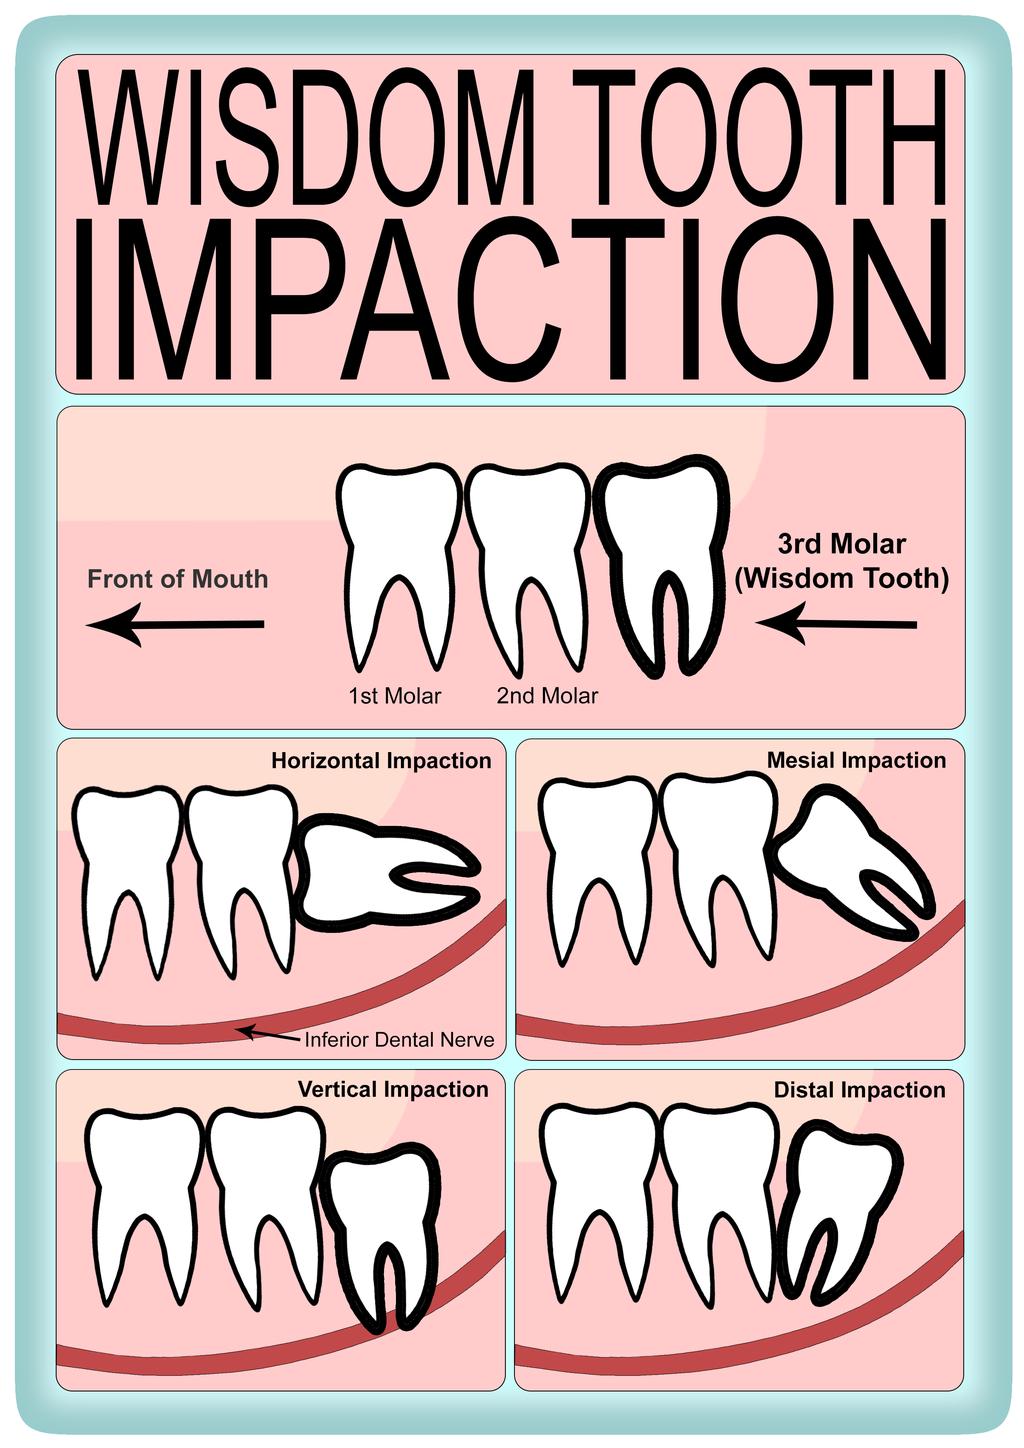 Issues with lower wisdom teeth Wisdom teeth are the last teeth to develop in your jaws, often there is not enough space for them to erupt into the correct position like the other teeth in your mouth.